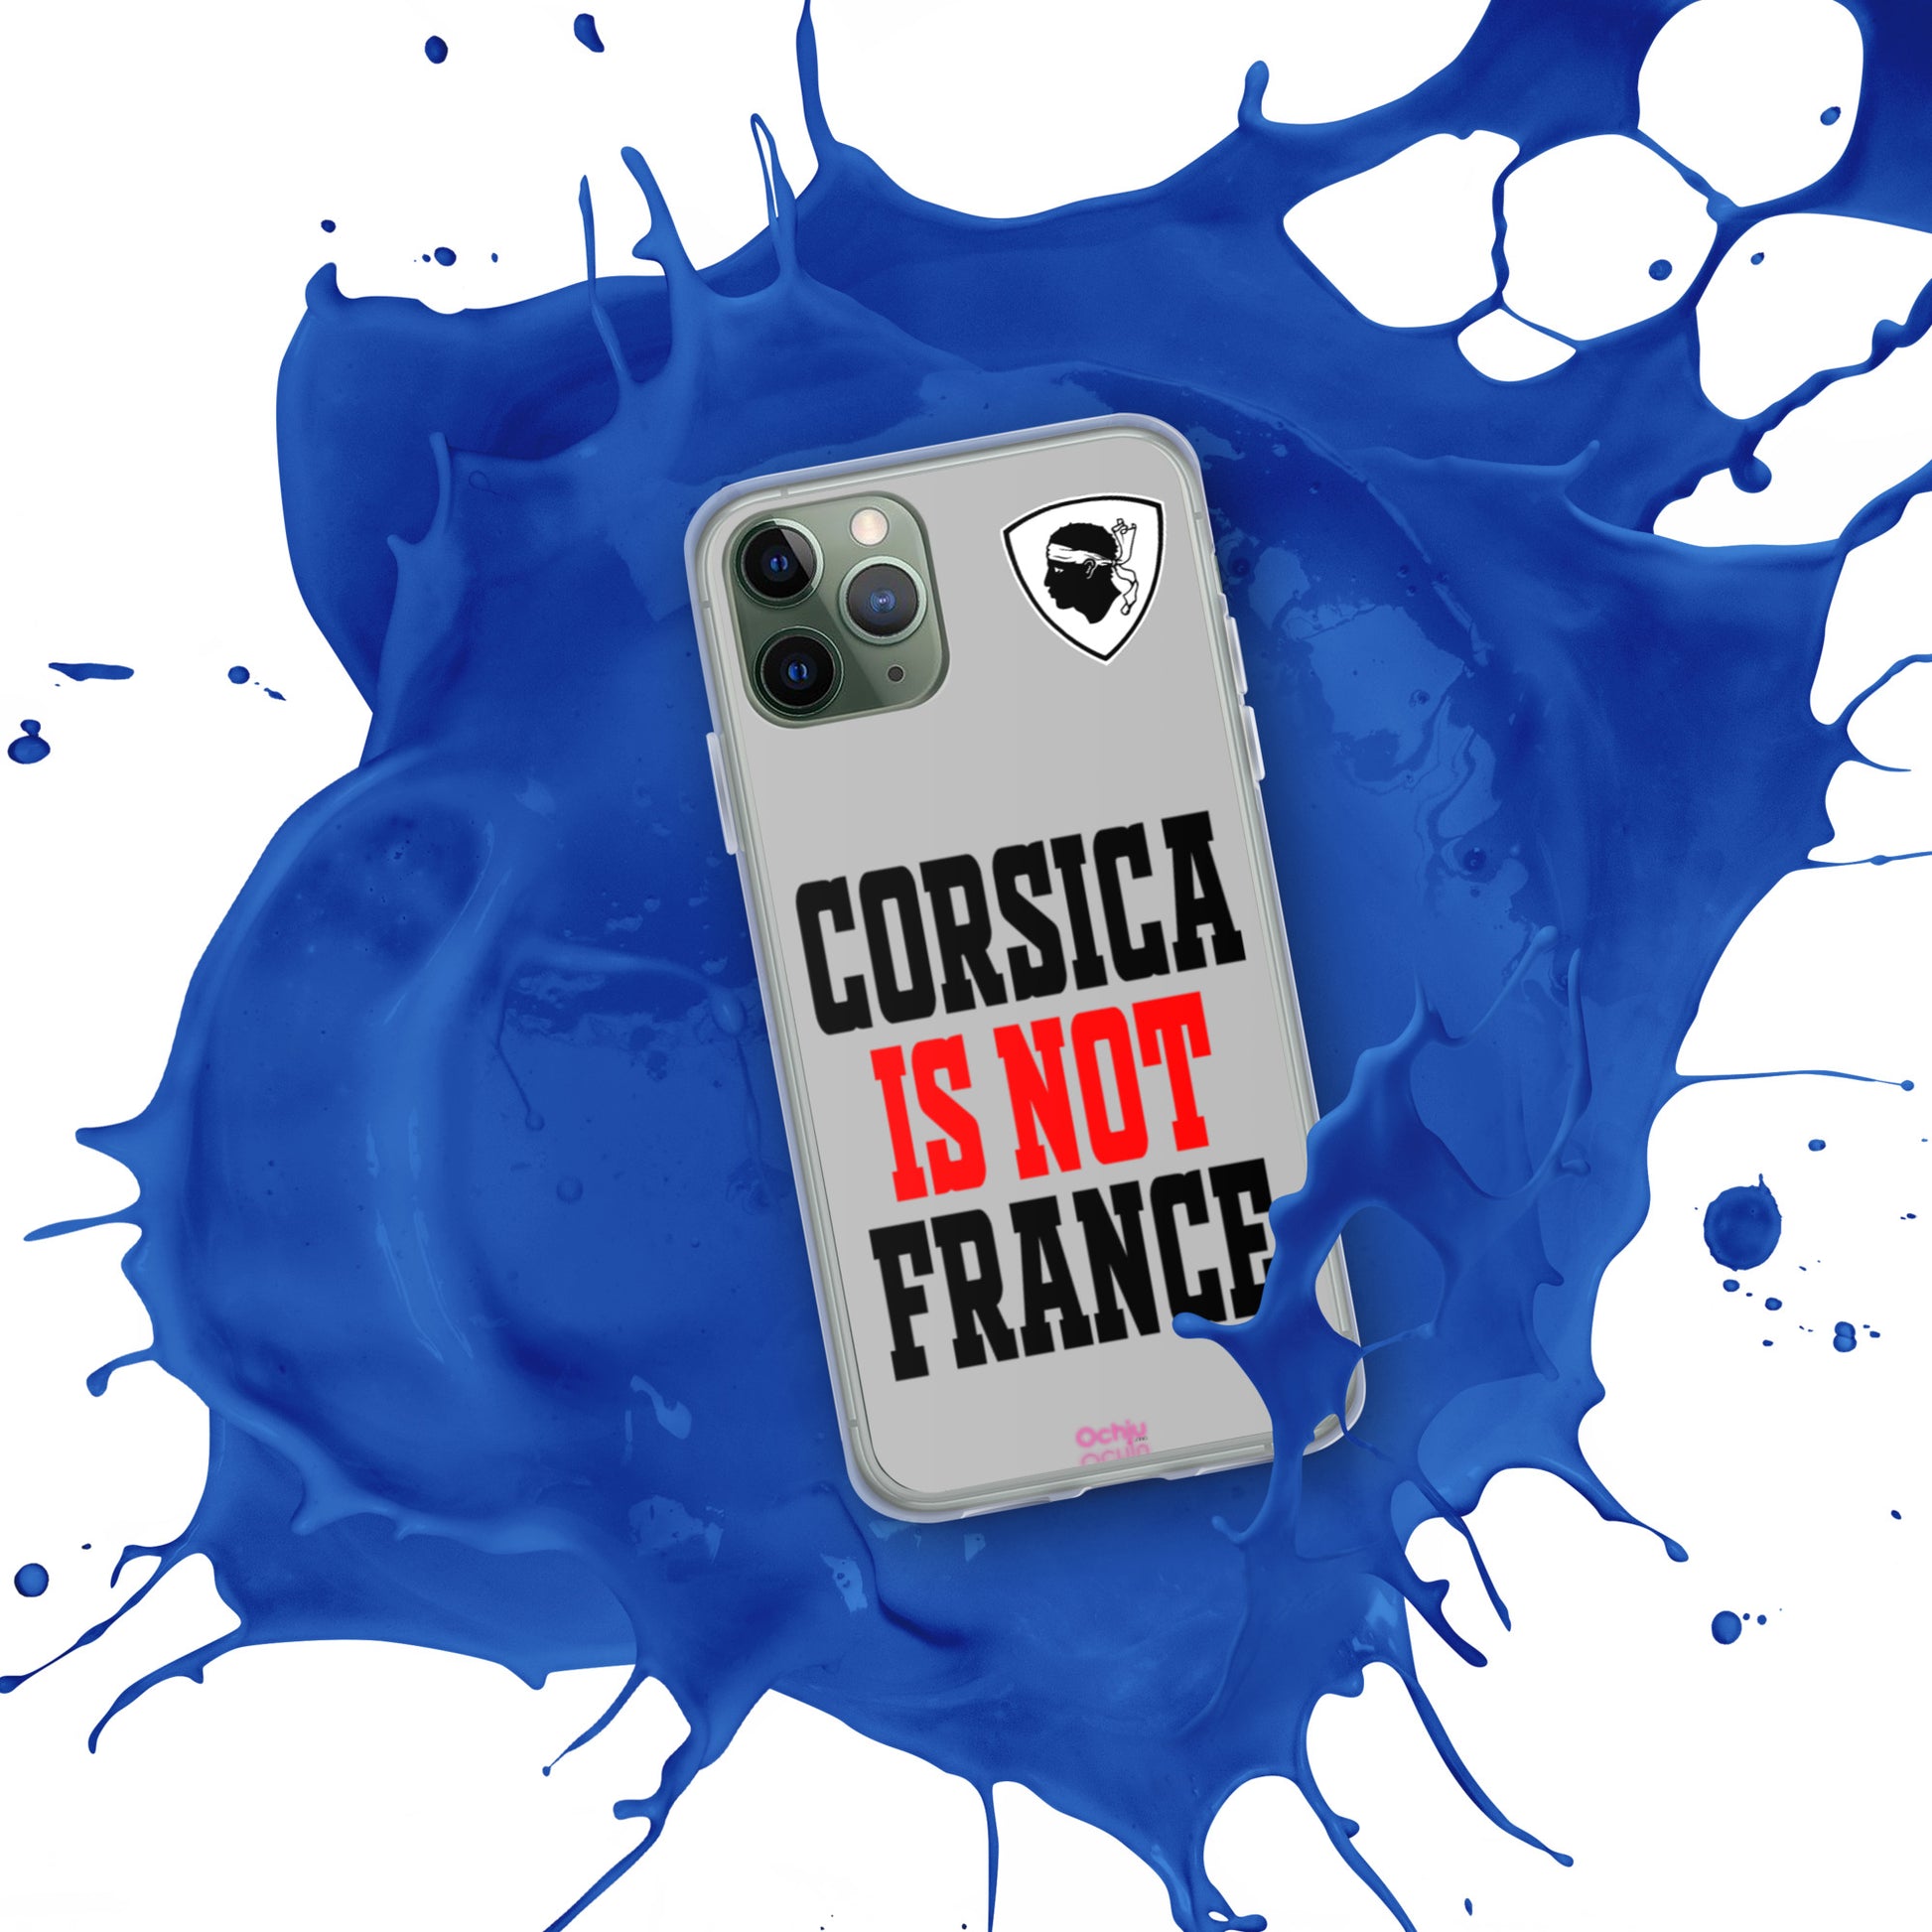 Coque pour iPhone Corsica is not France - Ochju Ochju iPhone 11 Pro Ochju Coque pour iPhone Corsica is not France